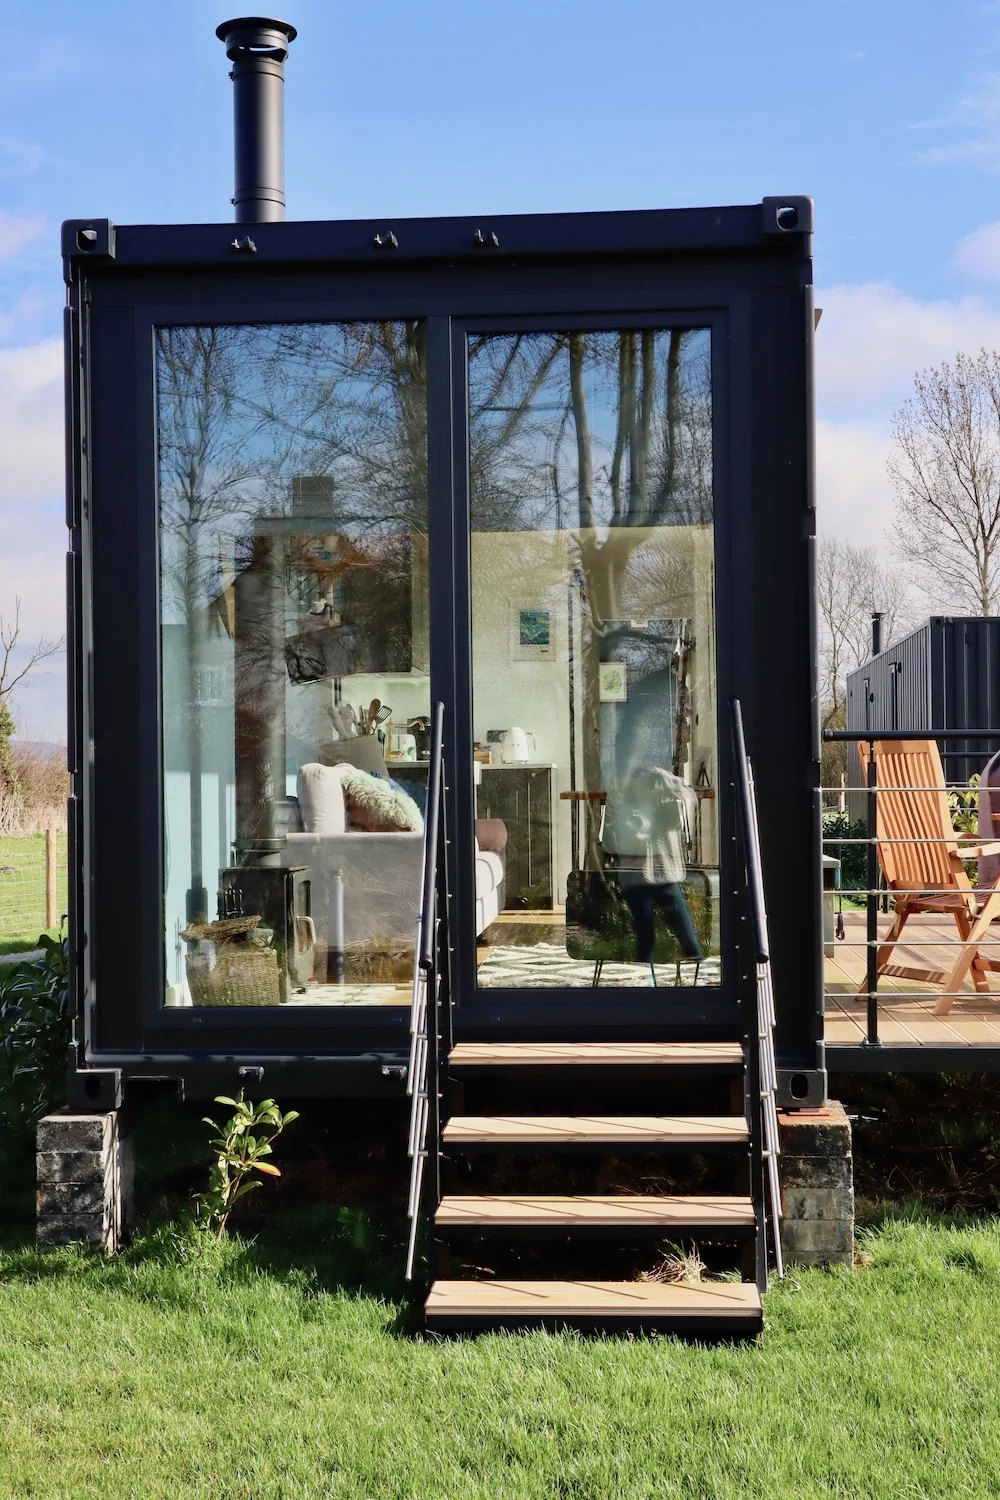 The Box BNB review: Glamping in a shipping container in North Yorkshire